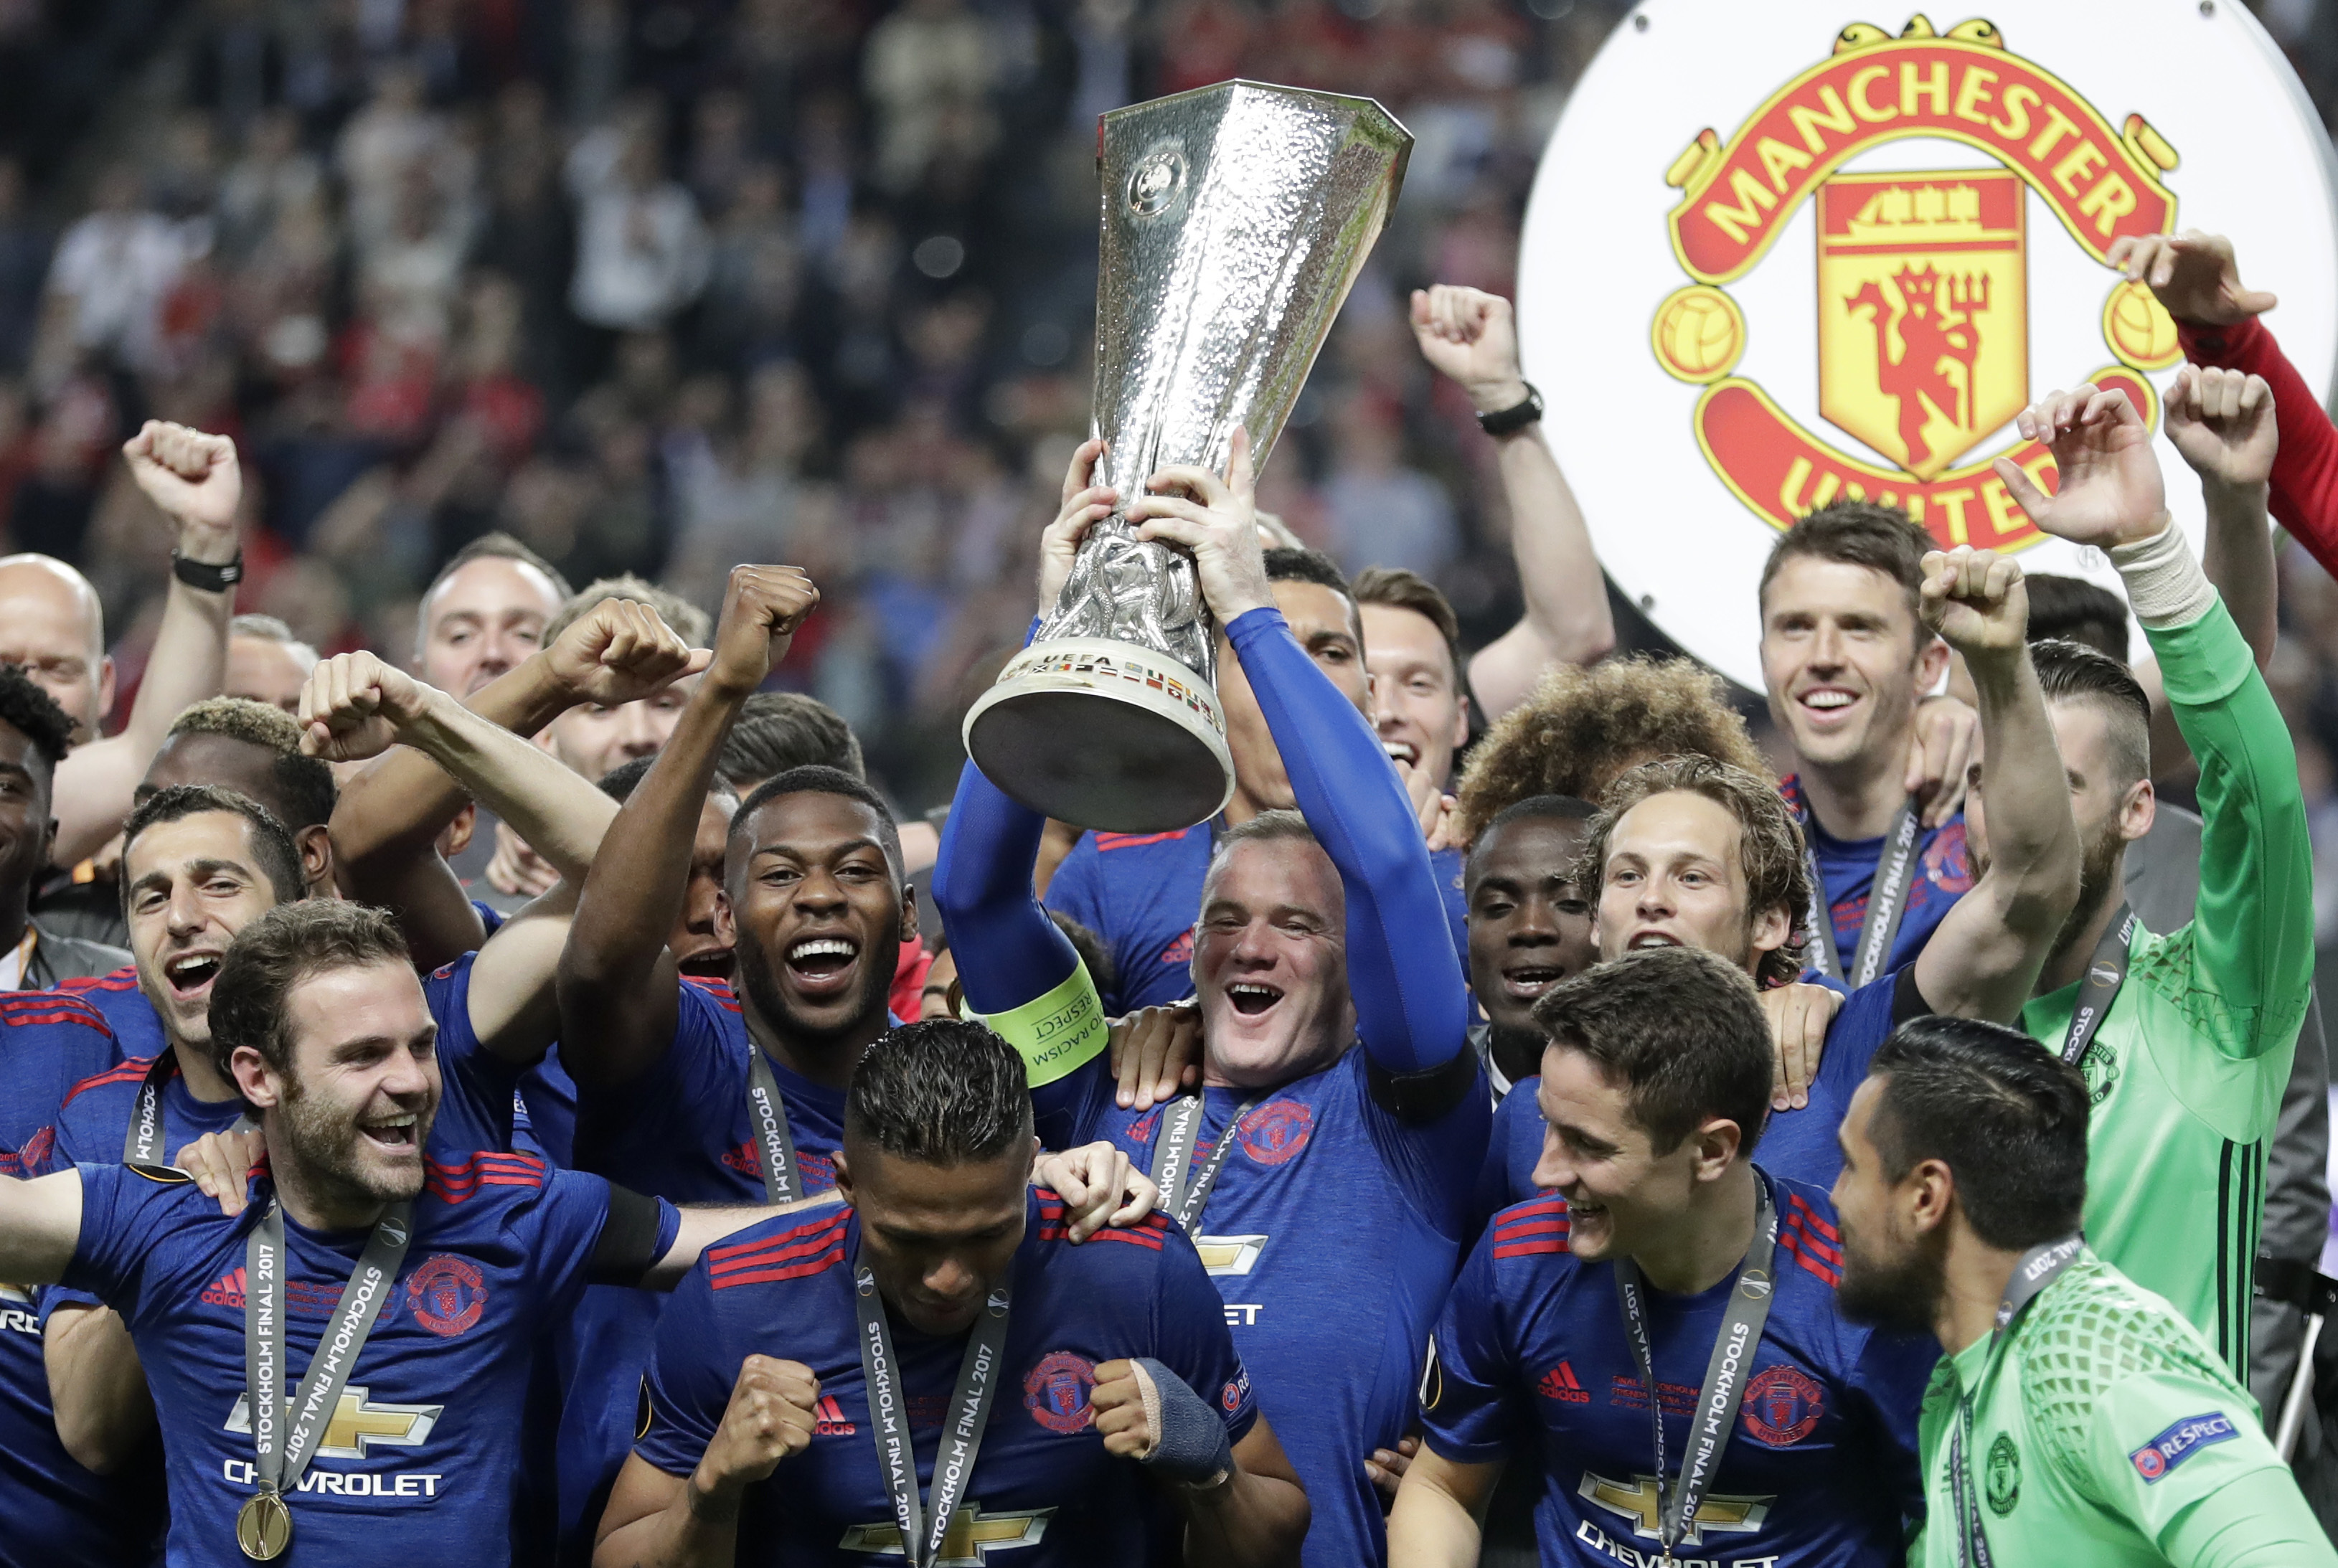 Man United fans celebrate triumph after tragedy | Inquirer Sports